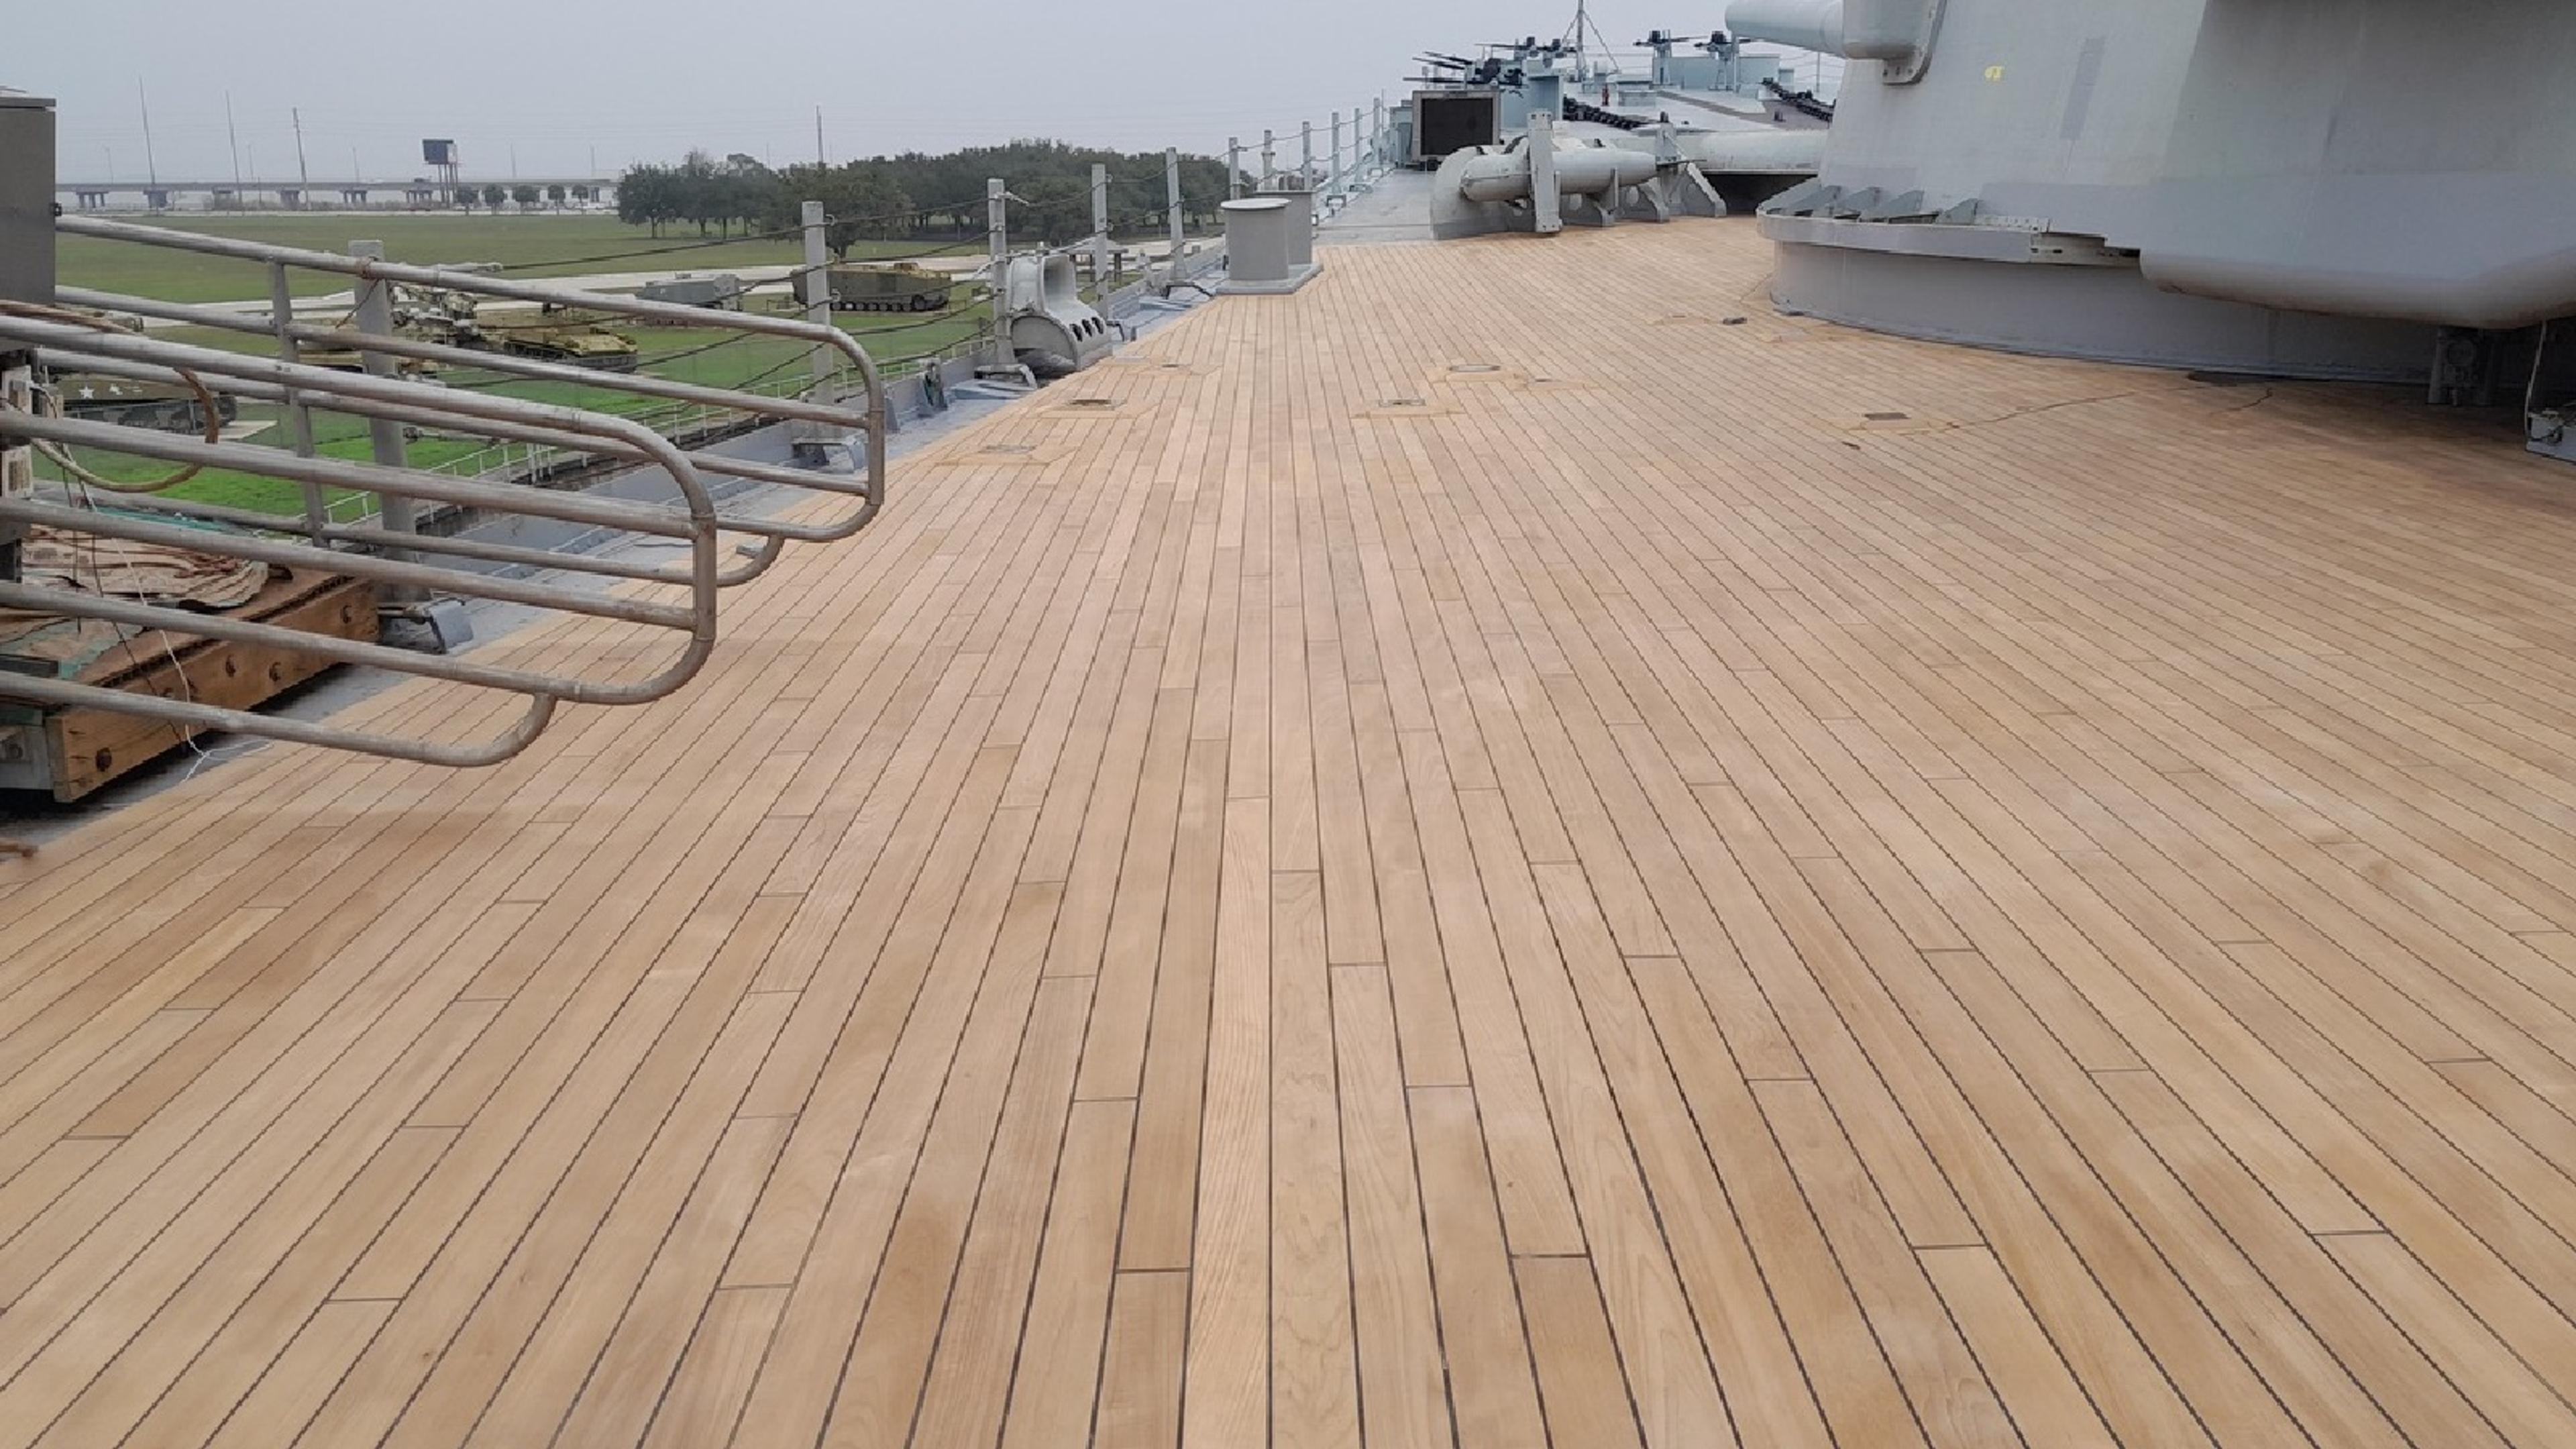 the deck of the USS Alabama with new teak decking